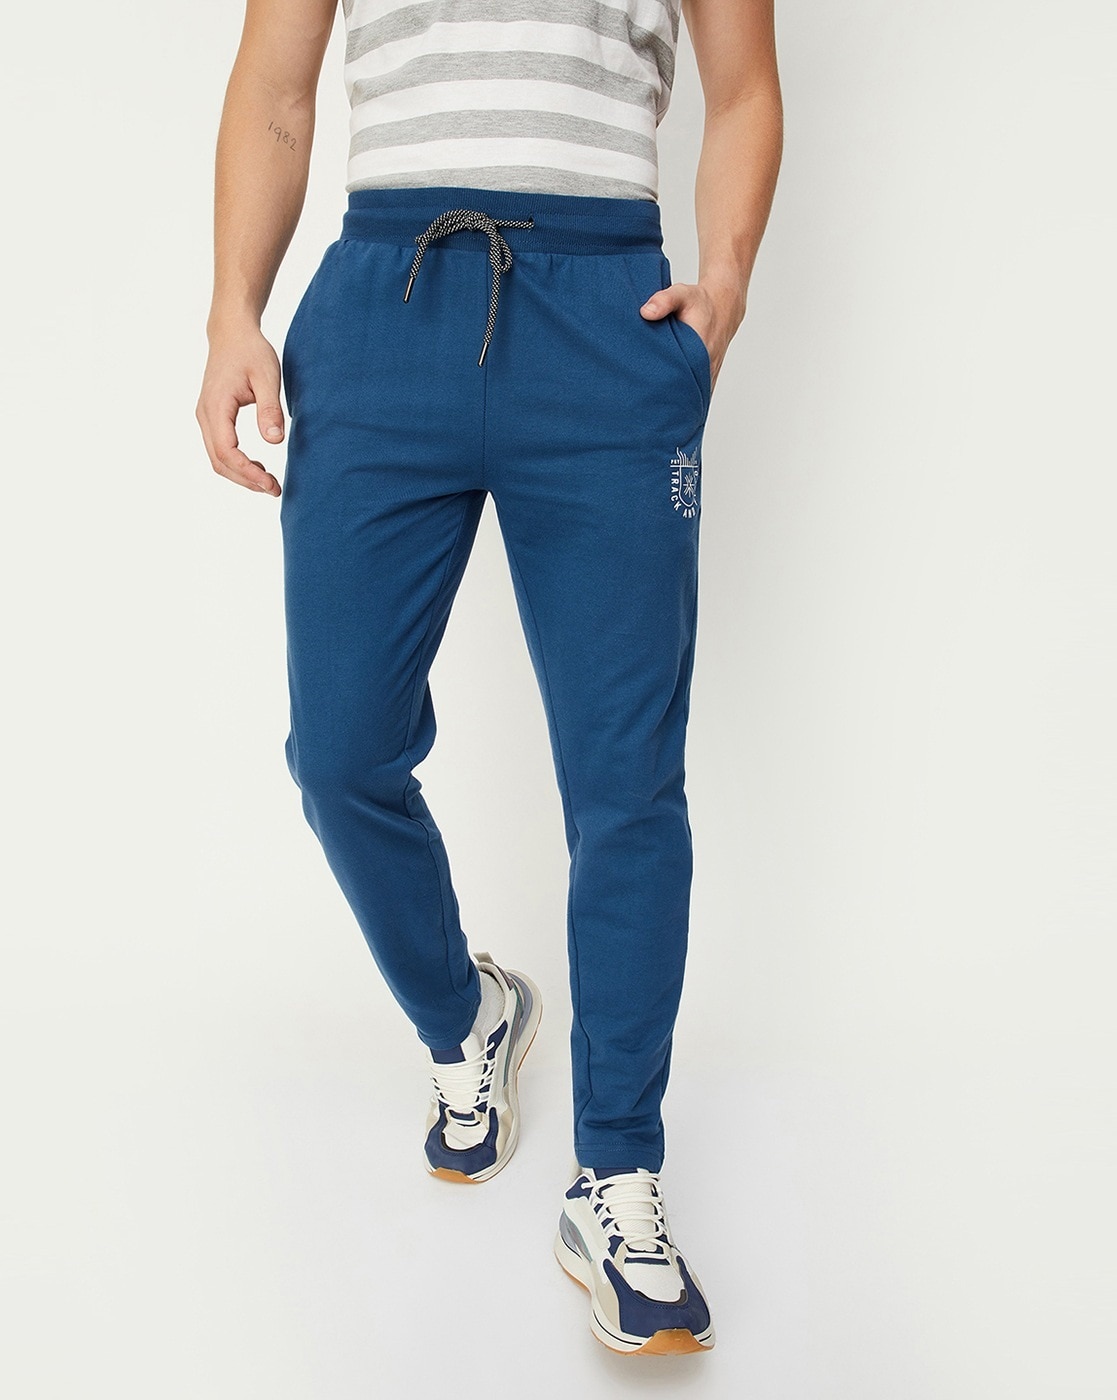 Mount Feb Men Solid Denim Trackpant(MF_3358_Blue) (Large) : Amazon.in:  Clothing & Accessories